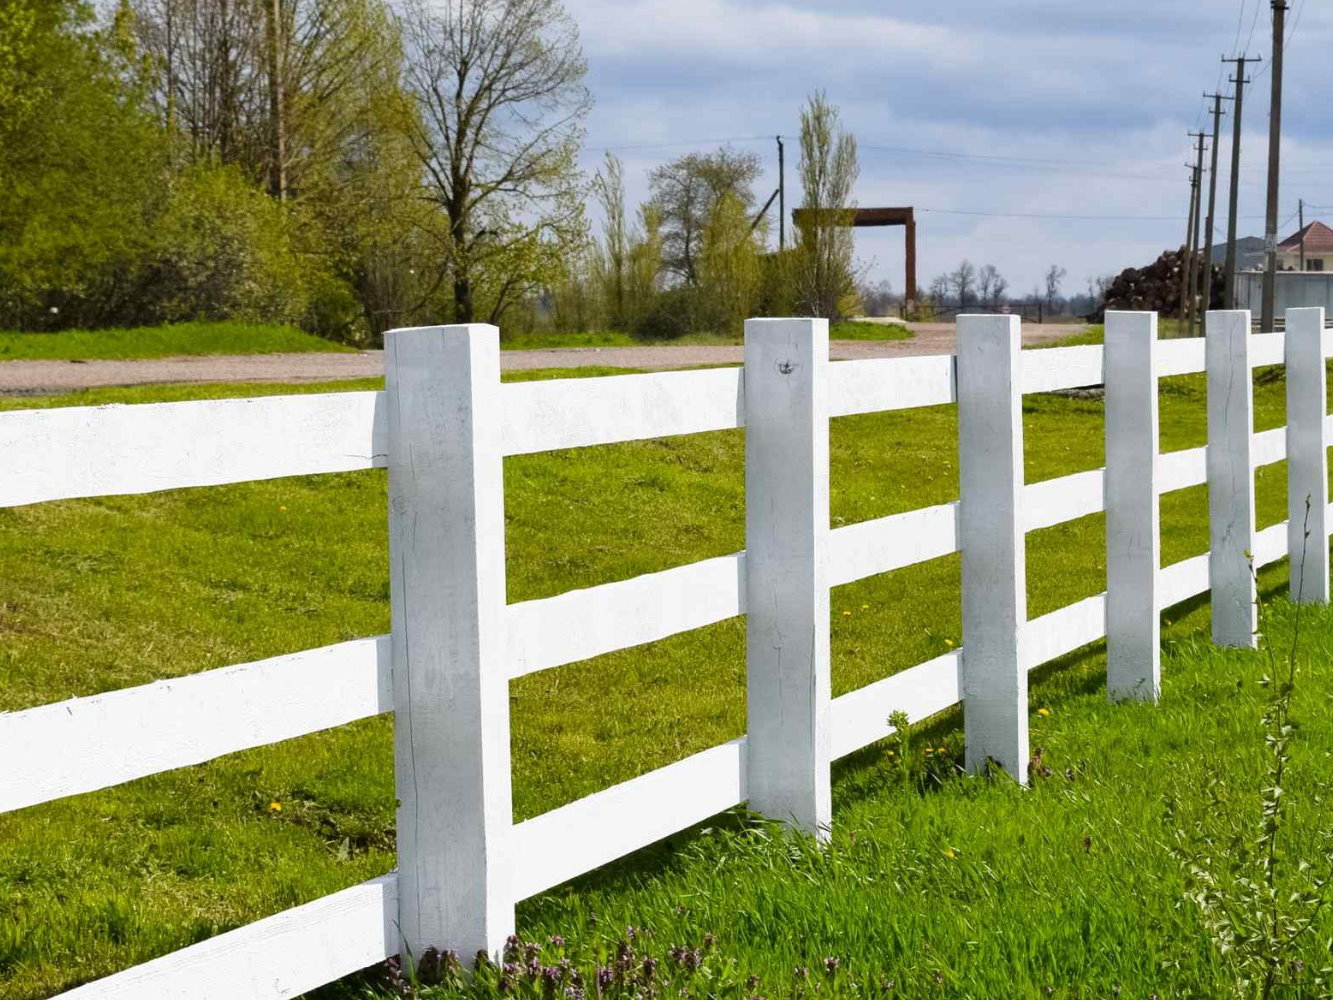 Commercial Vinyl Fence - Rowesville, South Carolina